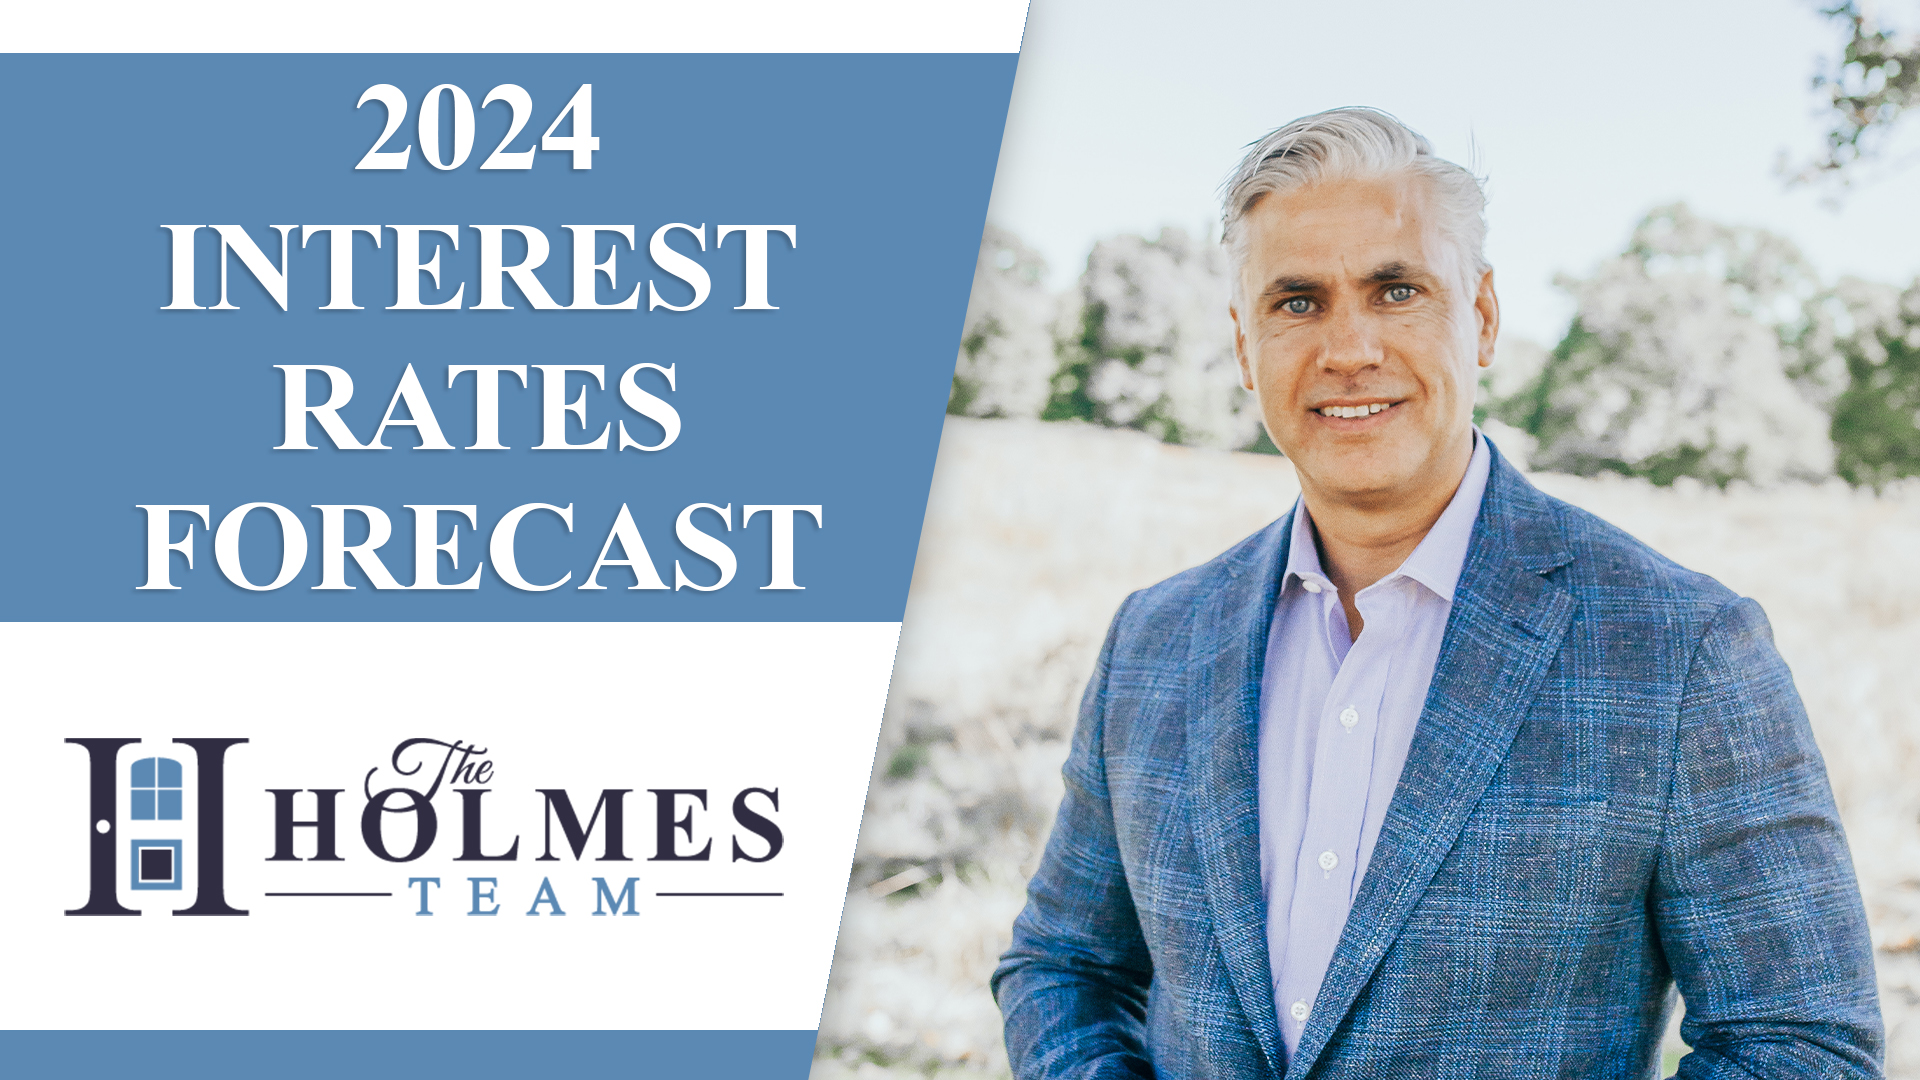 2024 Forecast: What Lies Ahead for Mortgage Interest Rates?